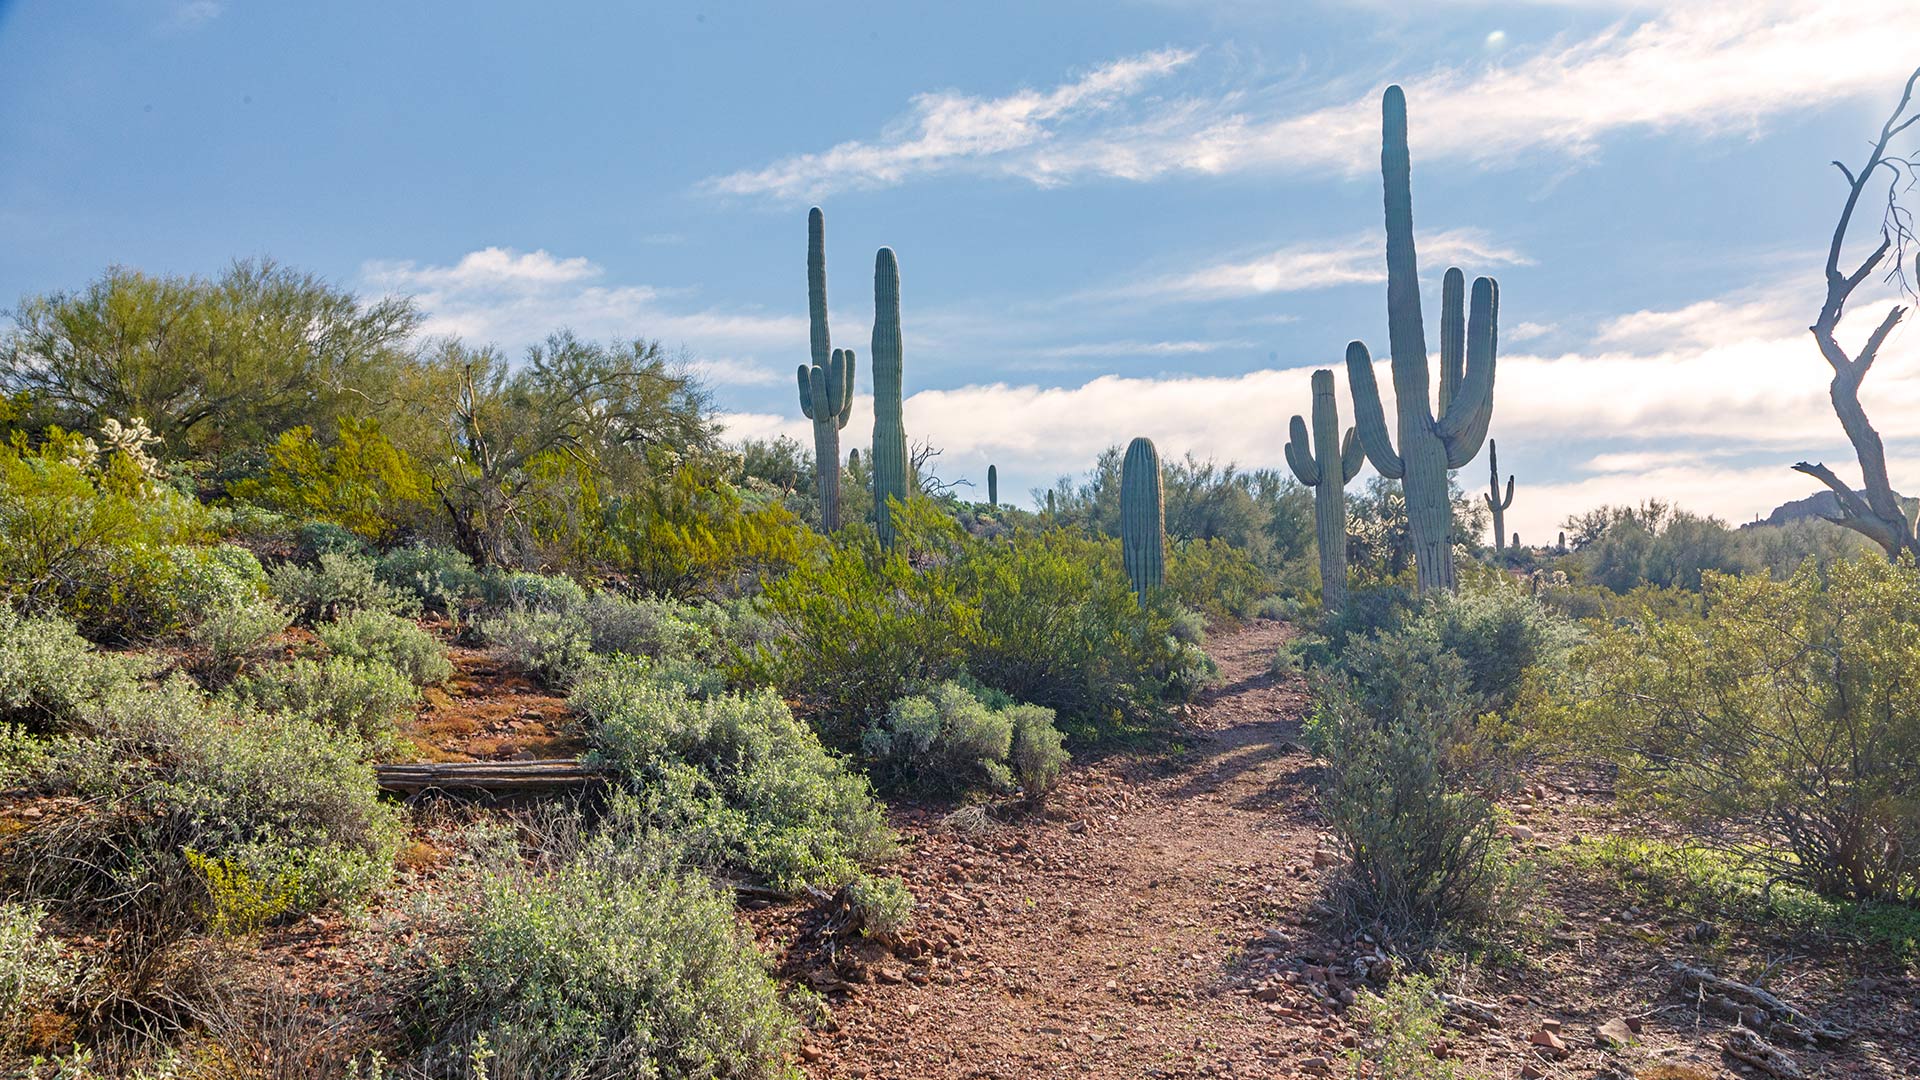 The Peralta Regional Park in Pinal County was funded by the Land and Water Conservation Fund and completed in February. Situated in the Superstition Mountains, the park has multi-use motorized trails, ramadas and campsites. 